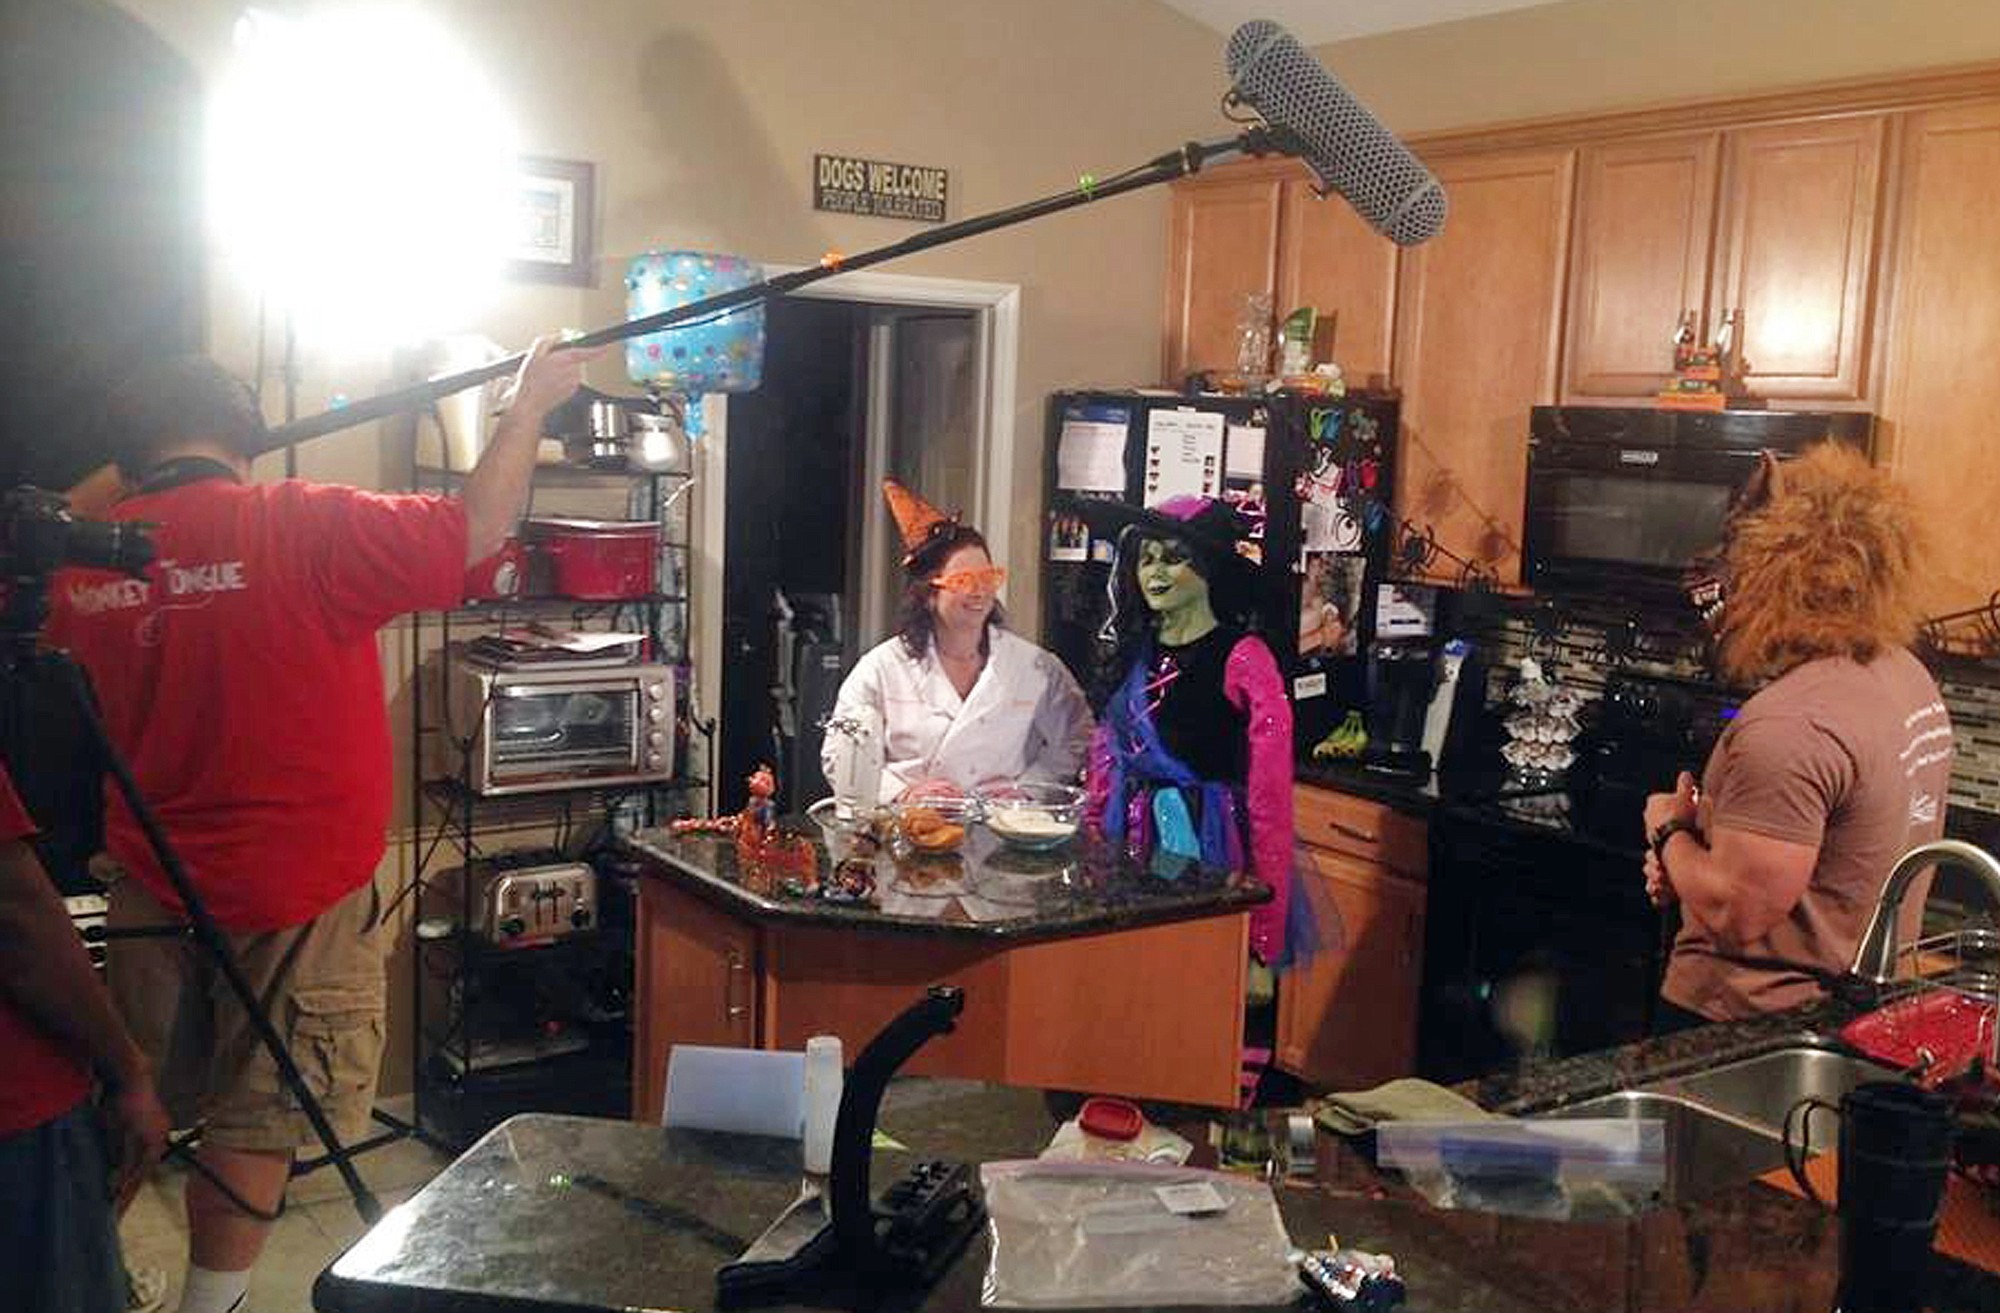 Denise Fernandez, in white smock, and crew members prepare to record a Halloween edition of the Doggy Cooking Network, a unique YouTube show for those into canine cuisine, at Kris Rotonda's home in Safety Harbor, Fla.